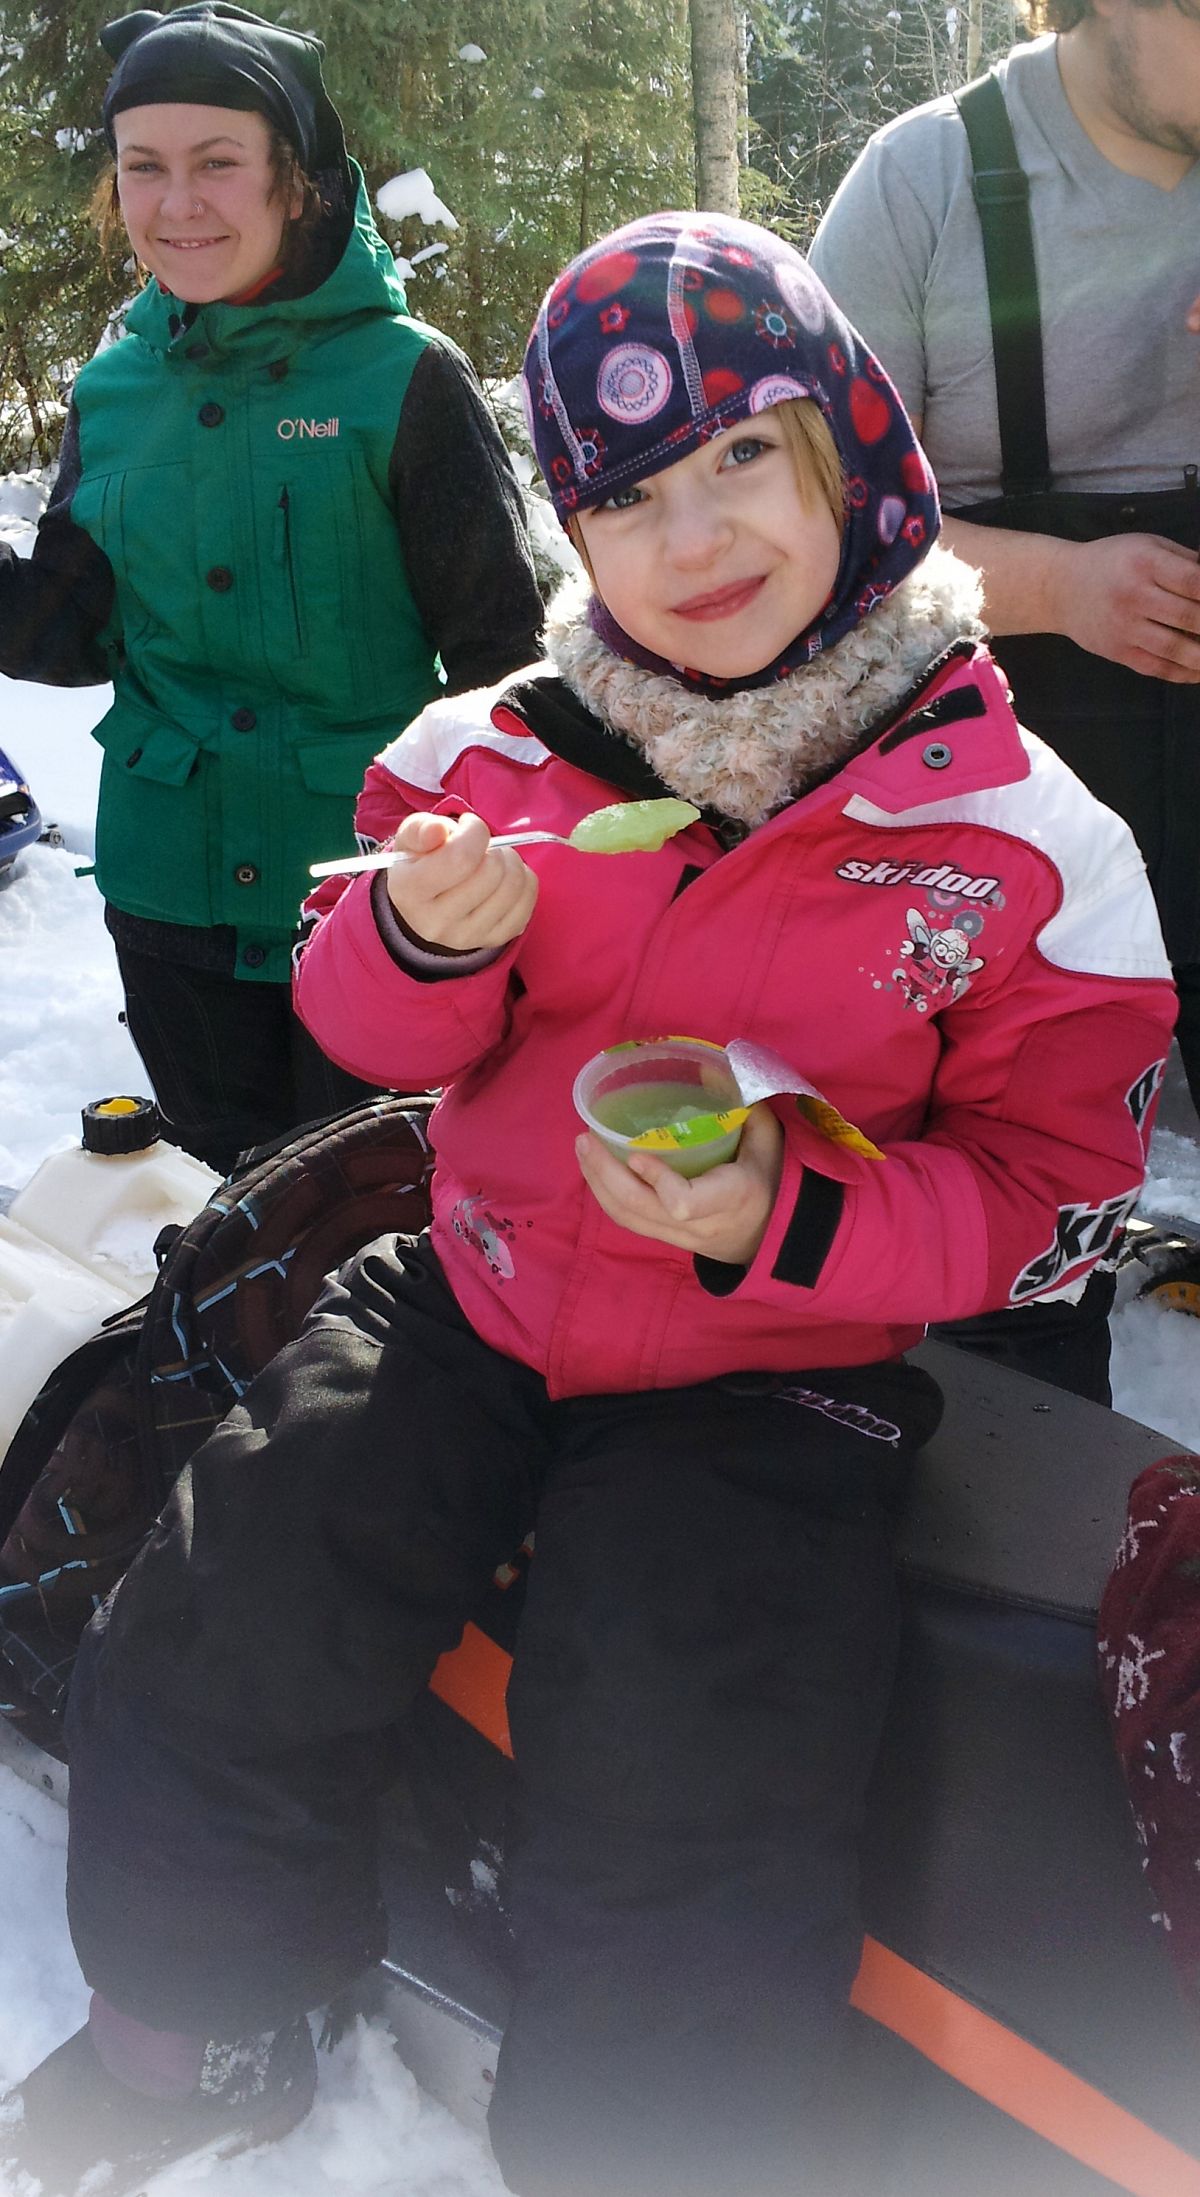 Photo taken at the annual rally at Weyakwin Lake.  Enjoying a snack at checkpoint before proceeding on!